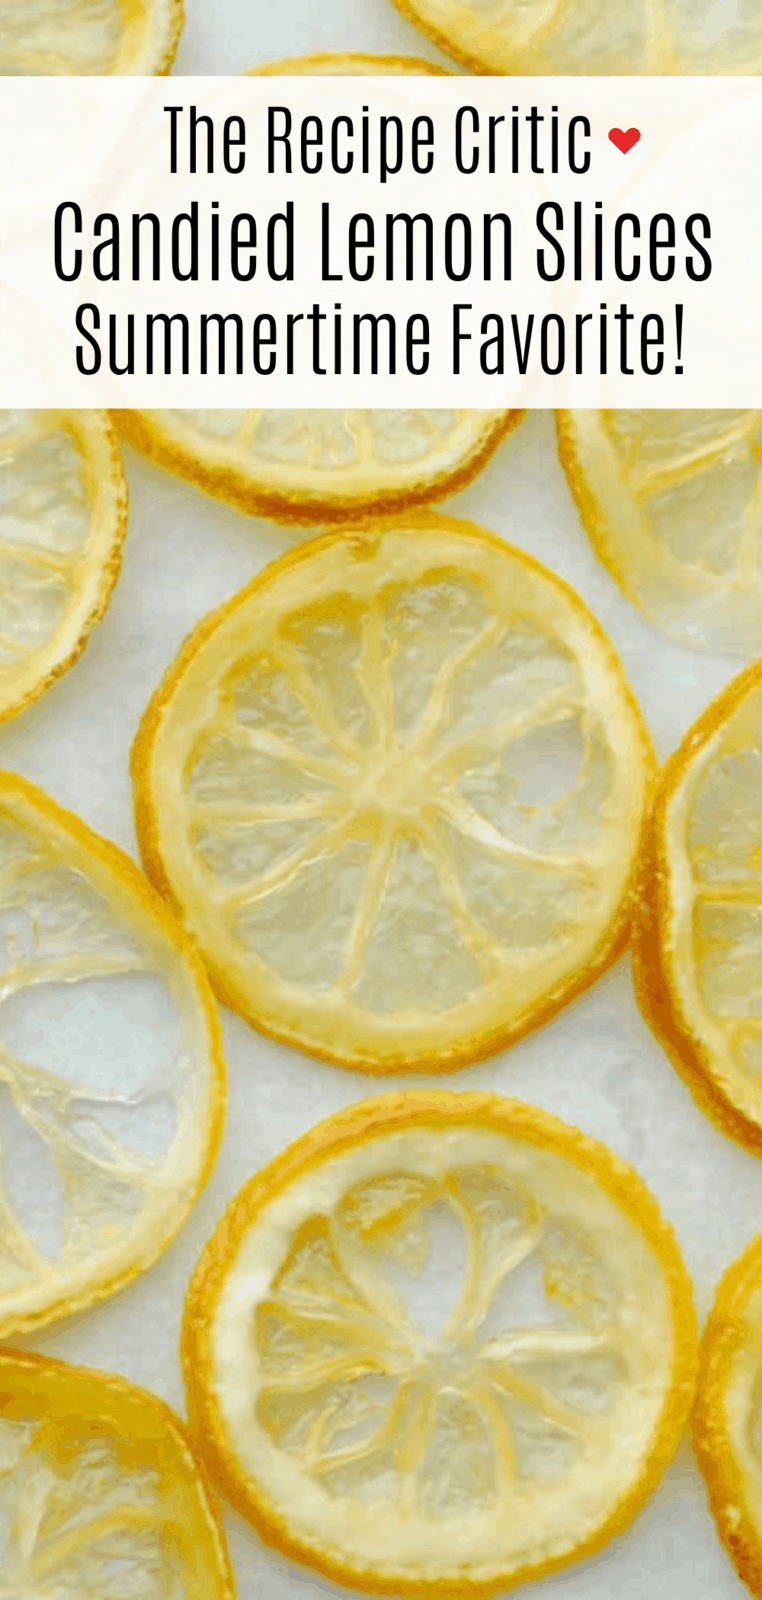 How to Make Candied Lemon Slices